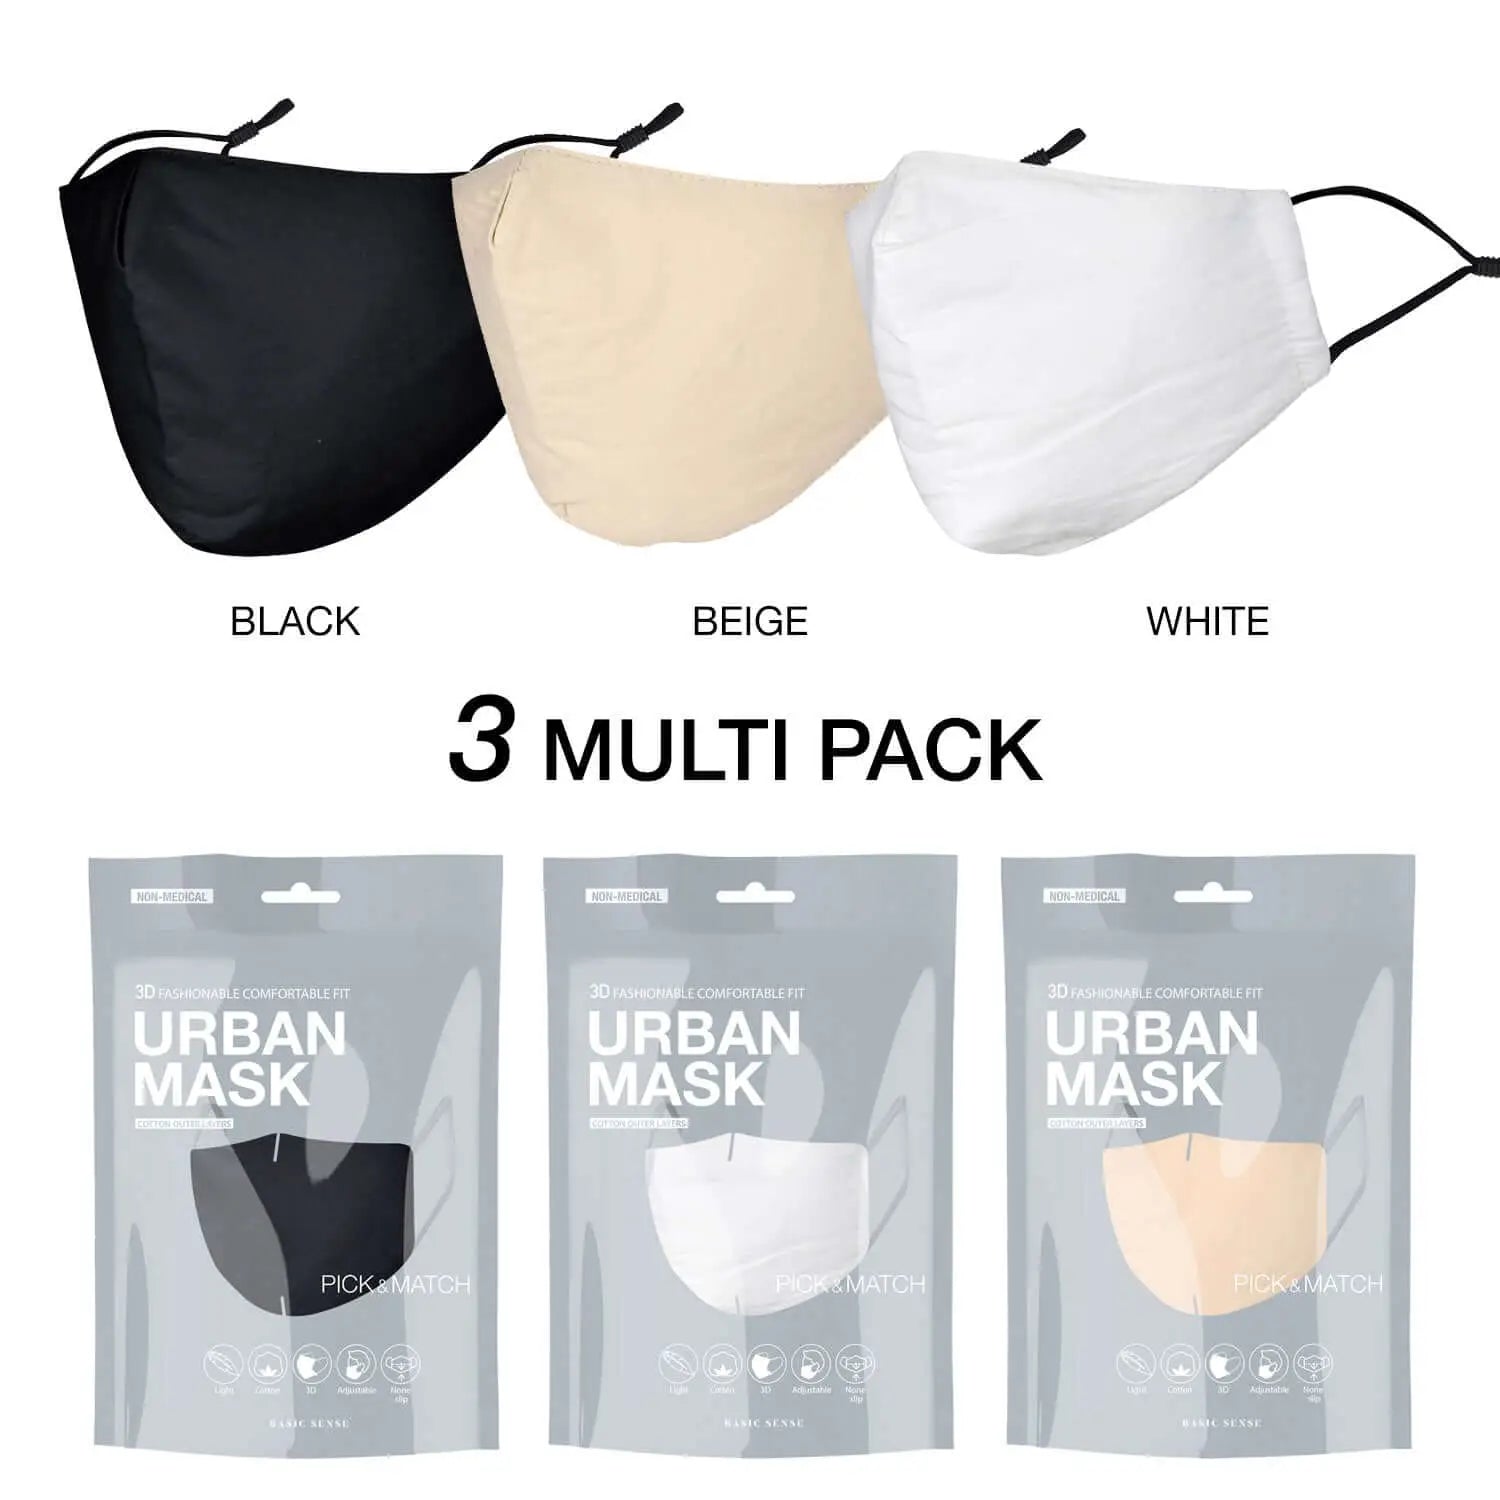 3 pack of cotton fashion face masks in black, white, and beige